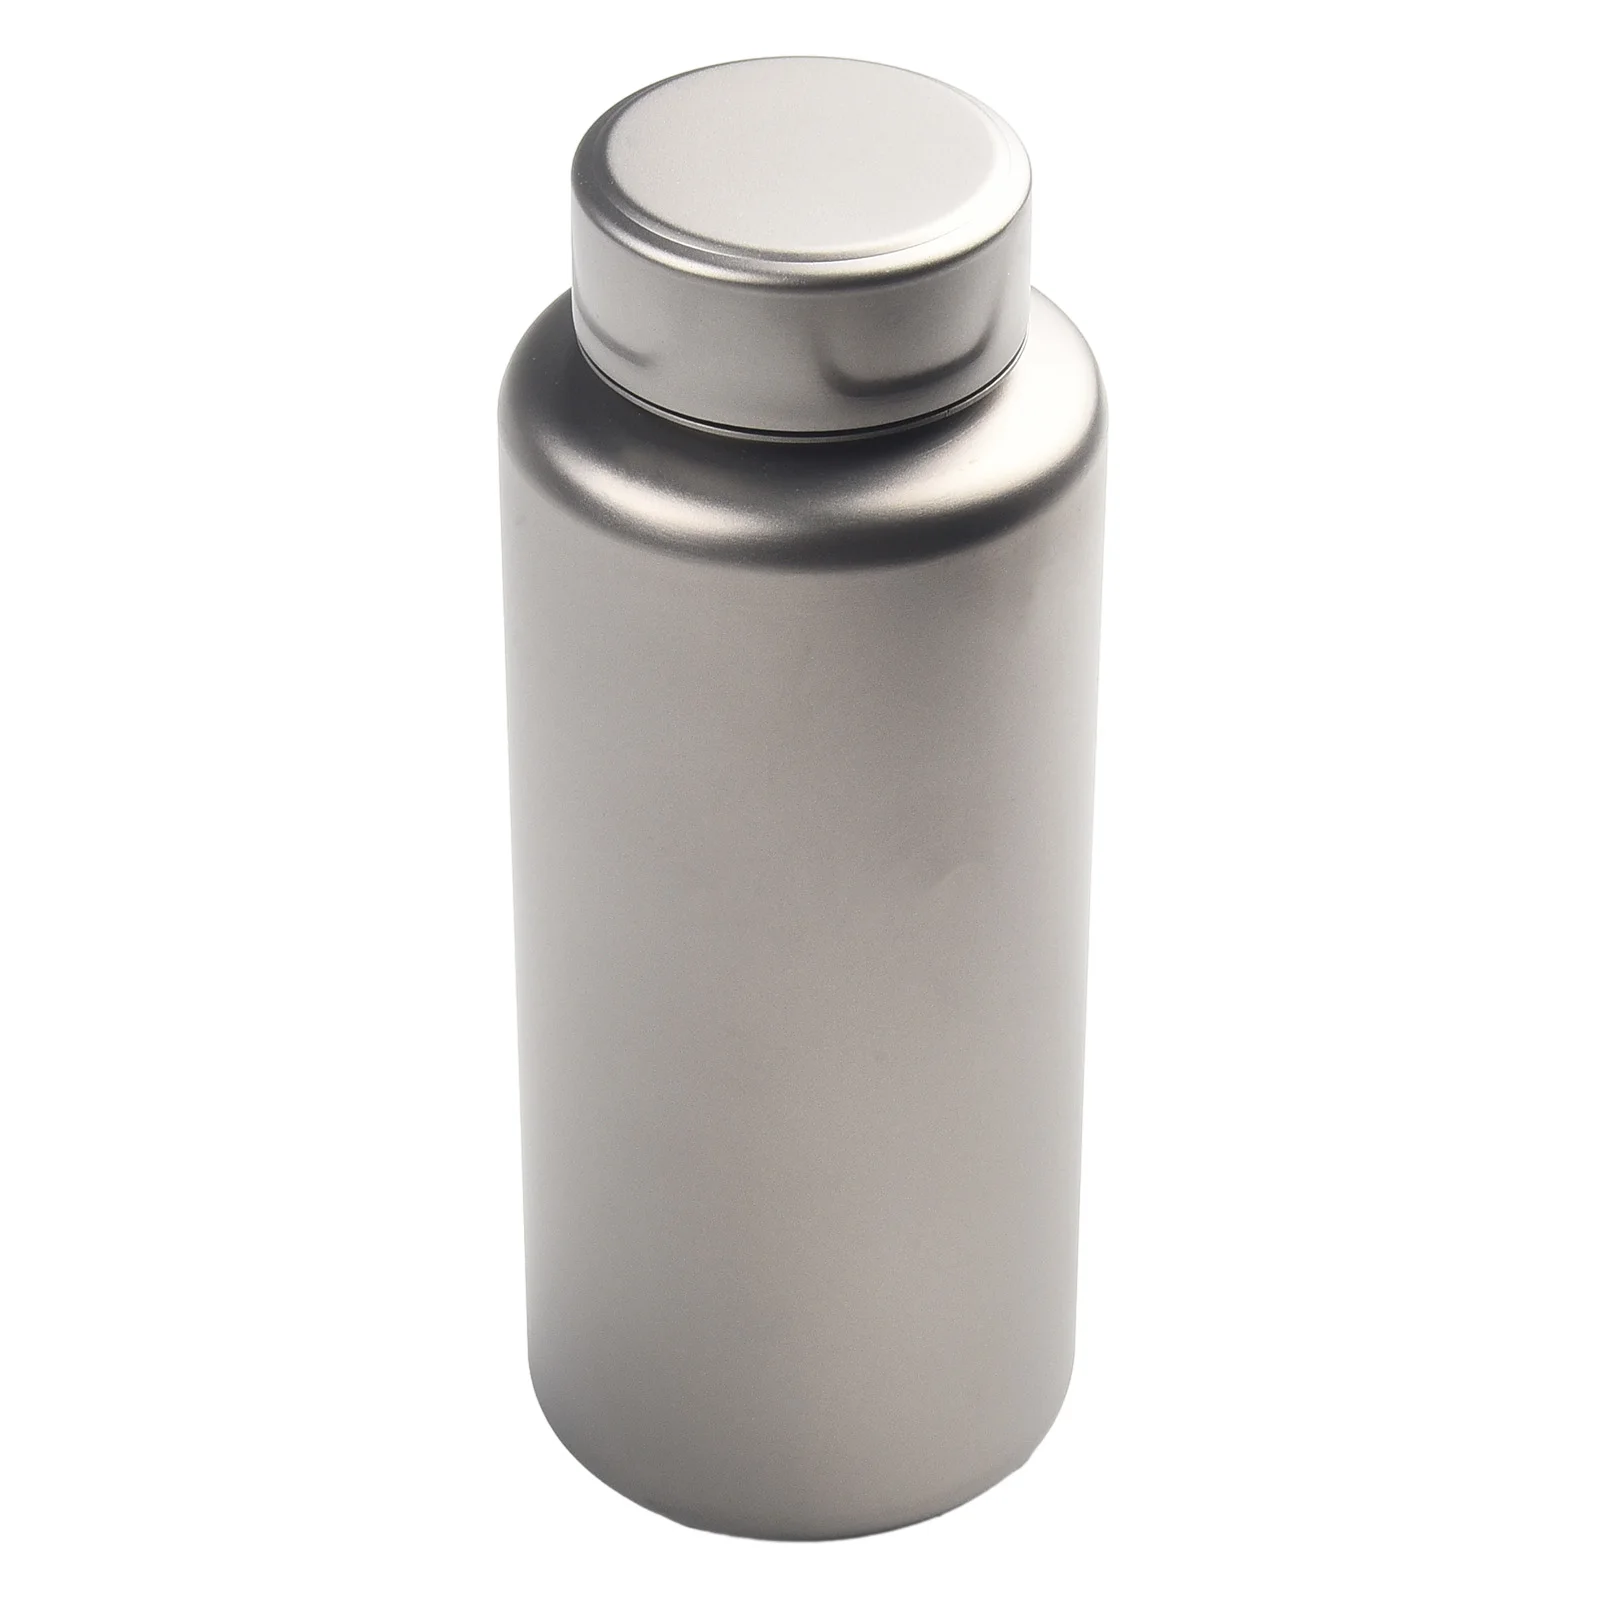 

Titanium Water Bottle Take Your Hydration to the Next Level with this Durable Titanium Water Bottle 700ml/1L Capacity